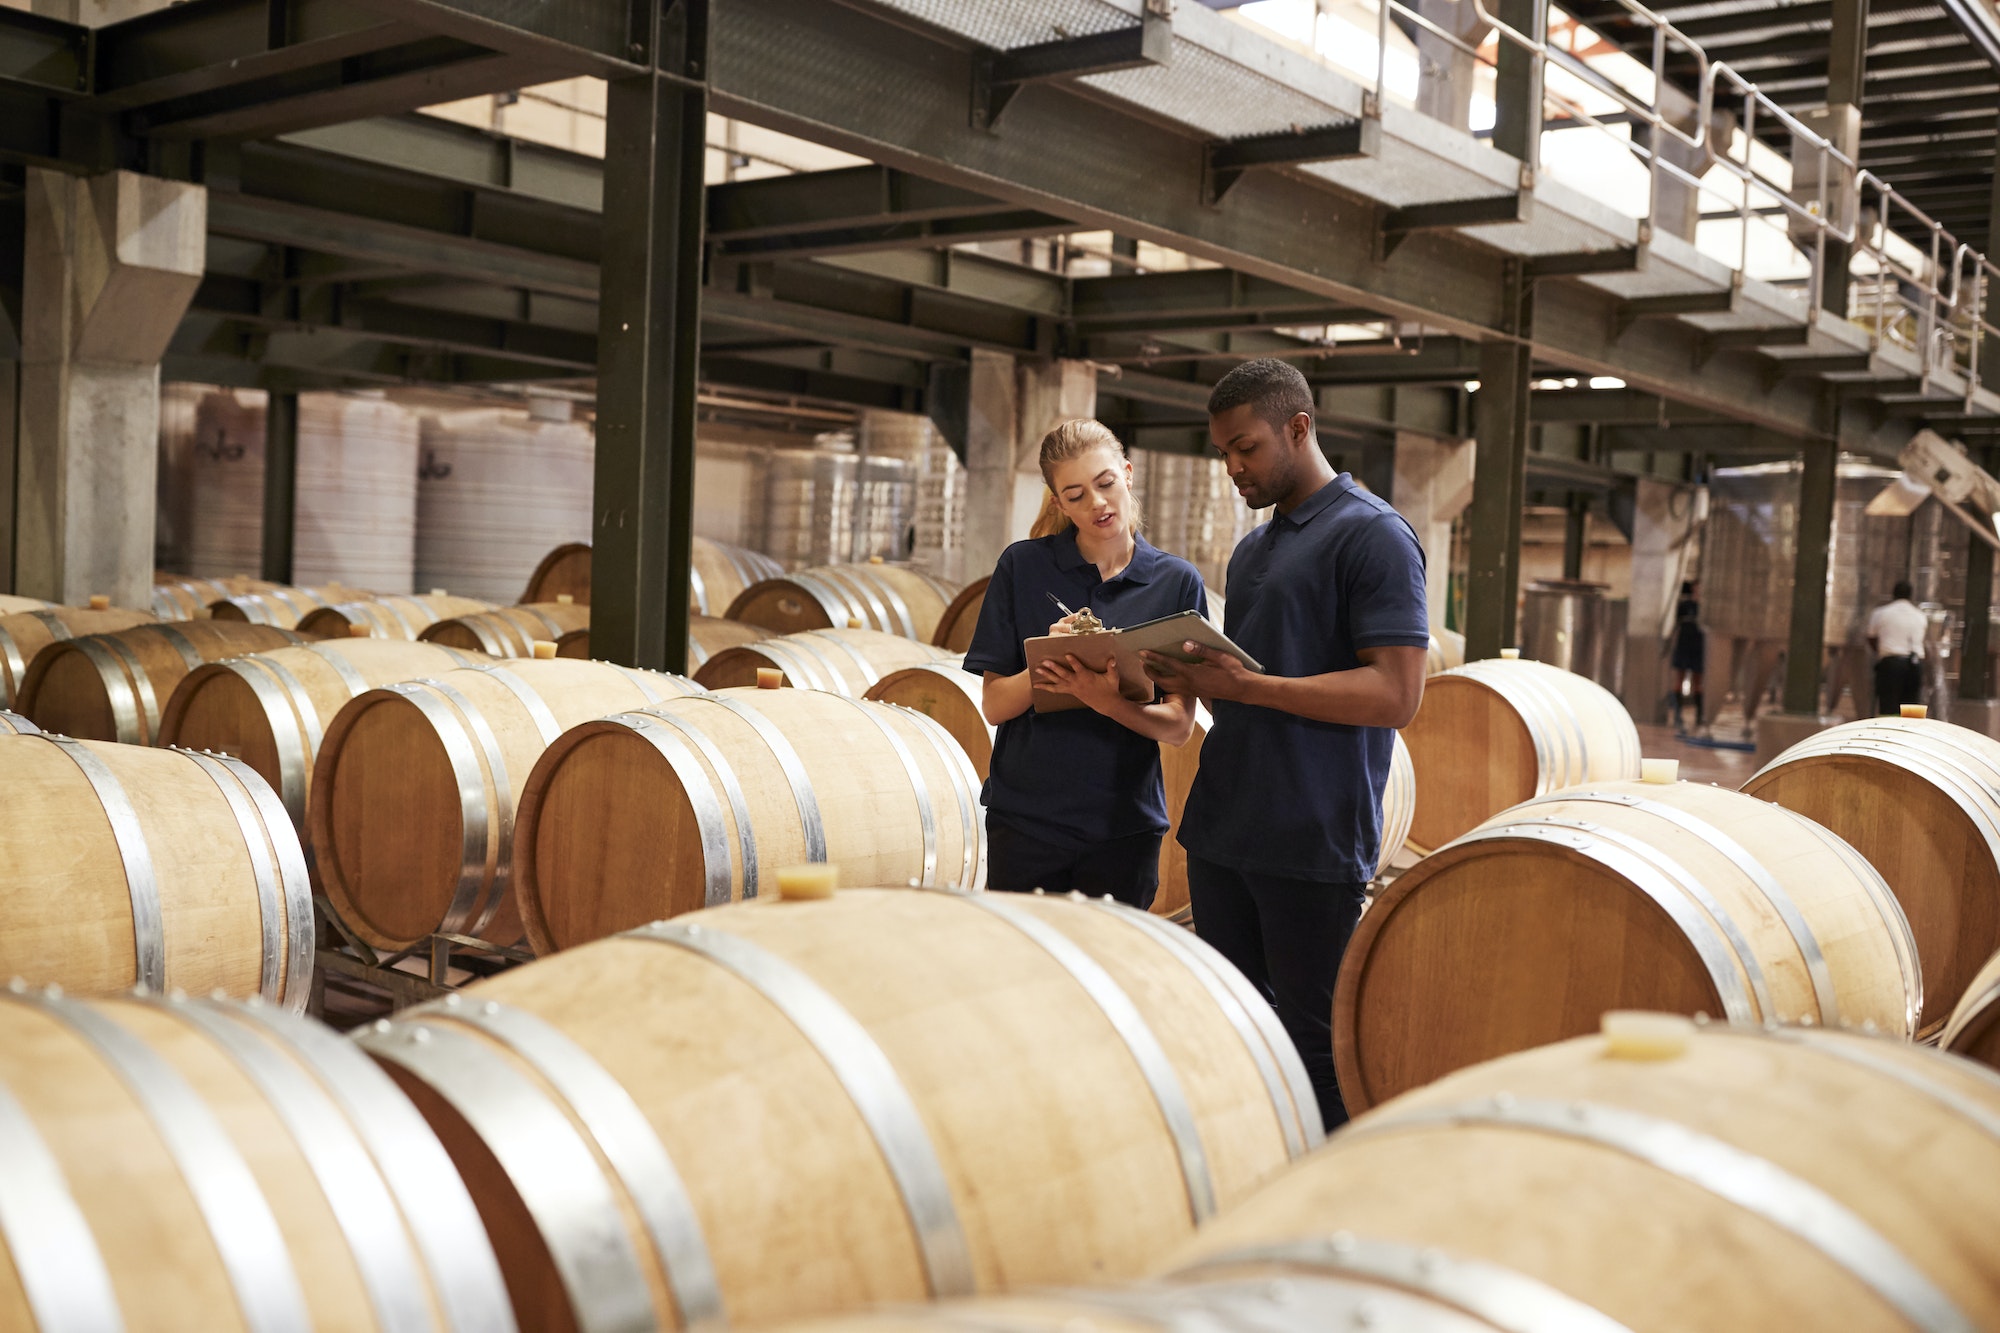 Two staff inspecting barrels in a wine factory warehouse